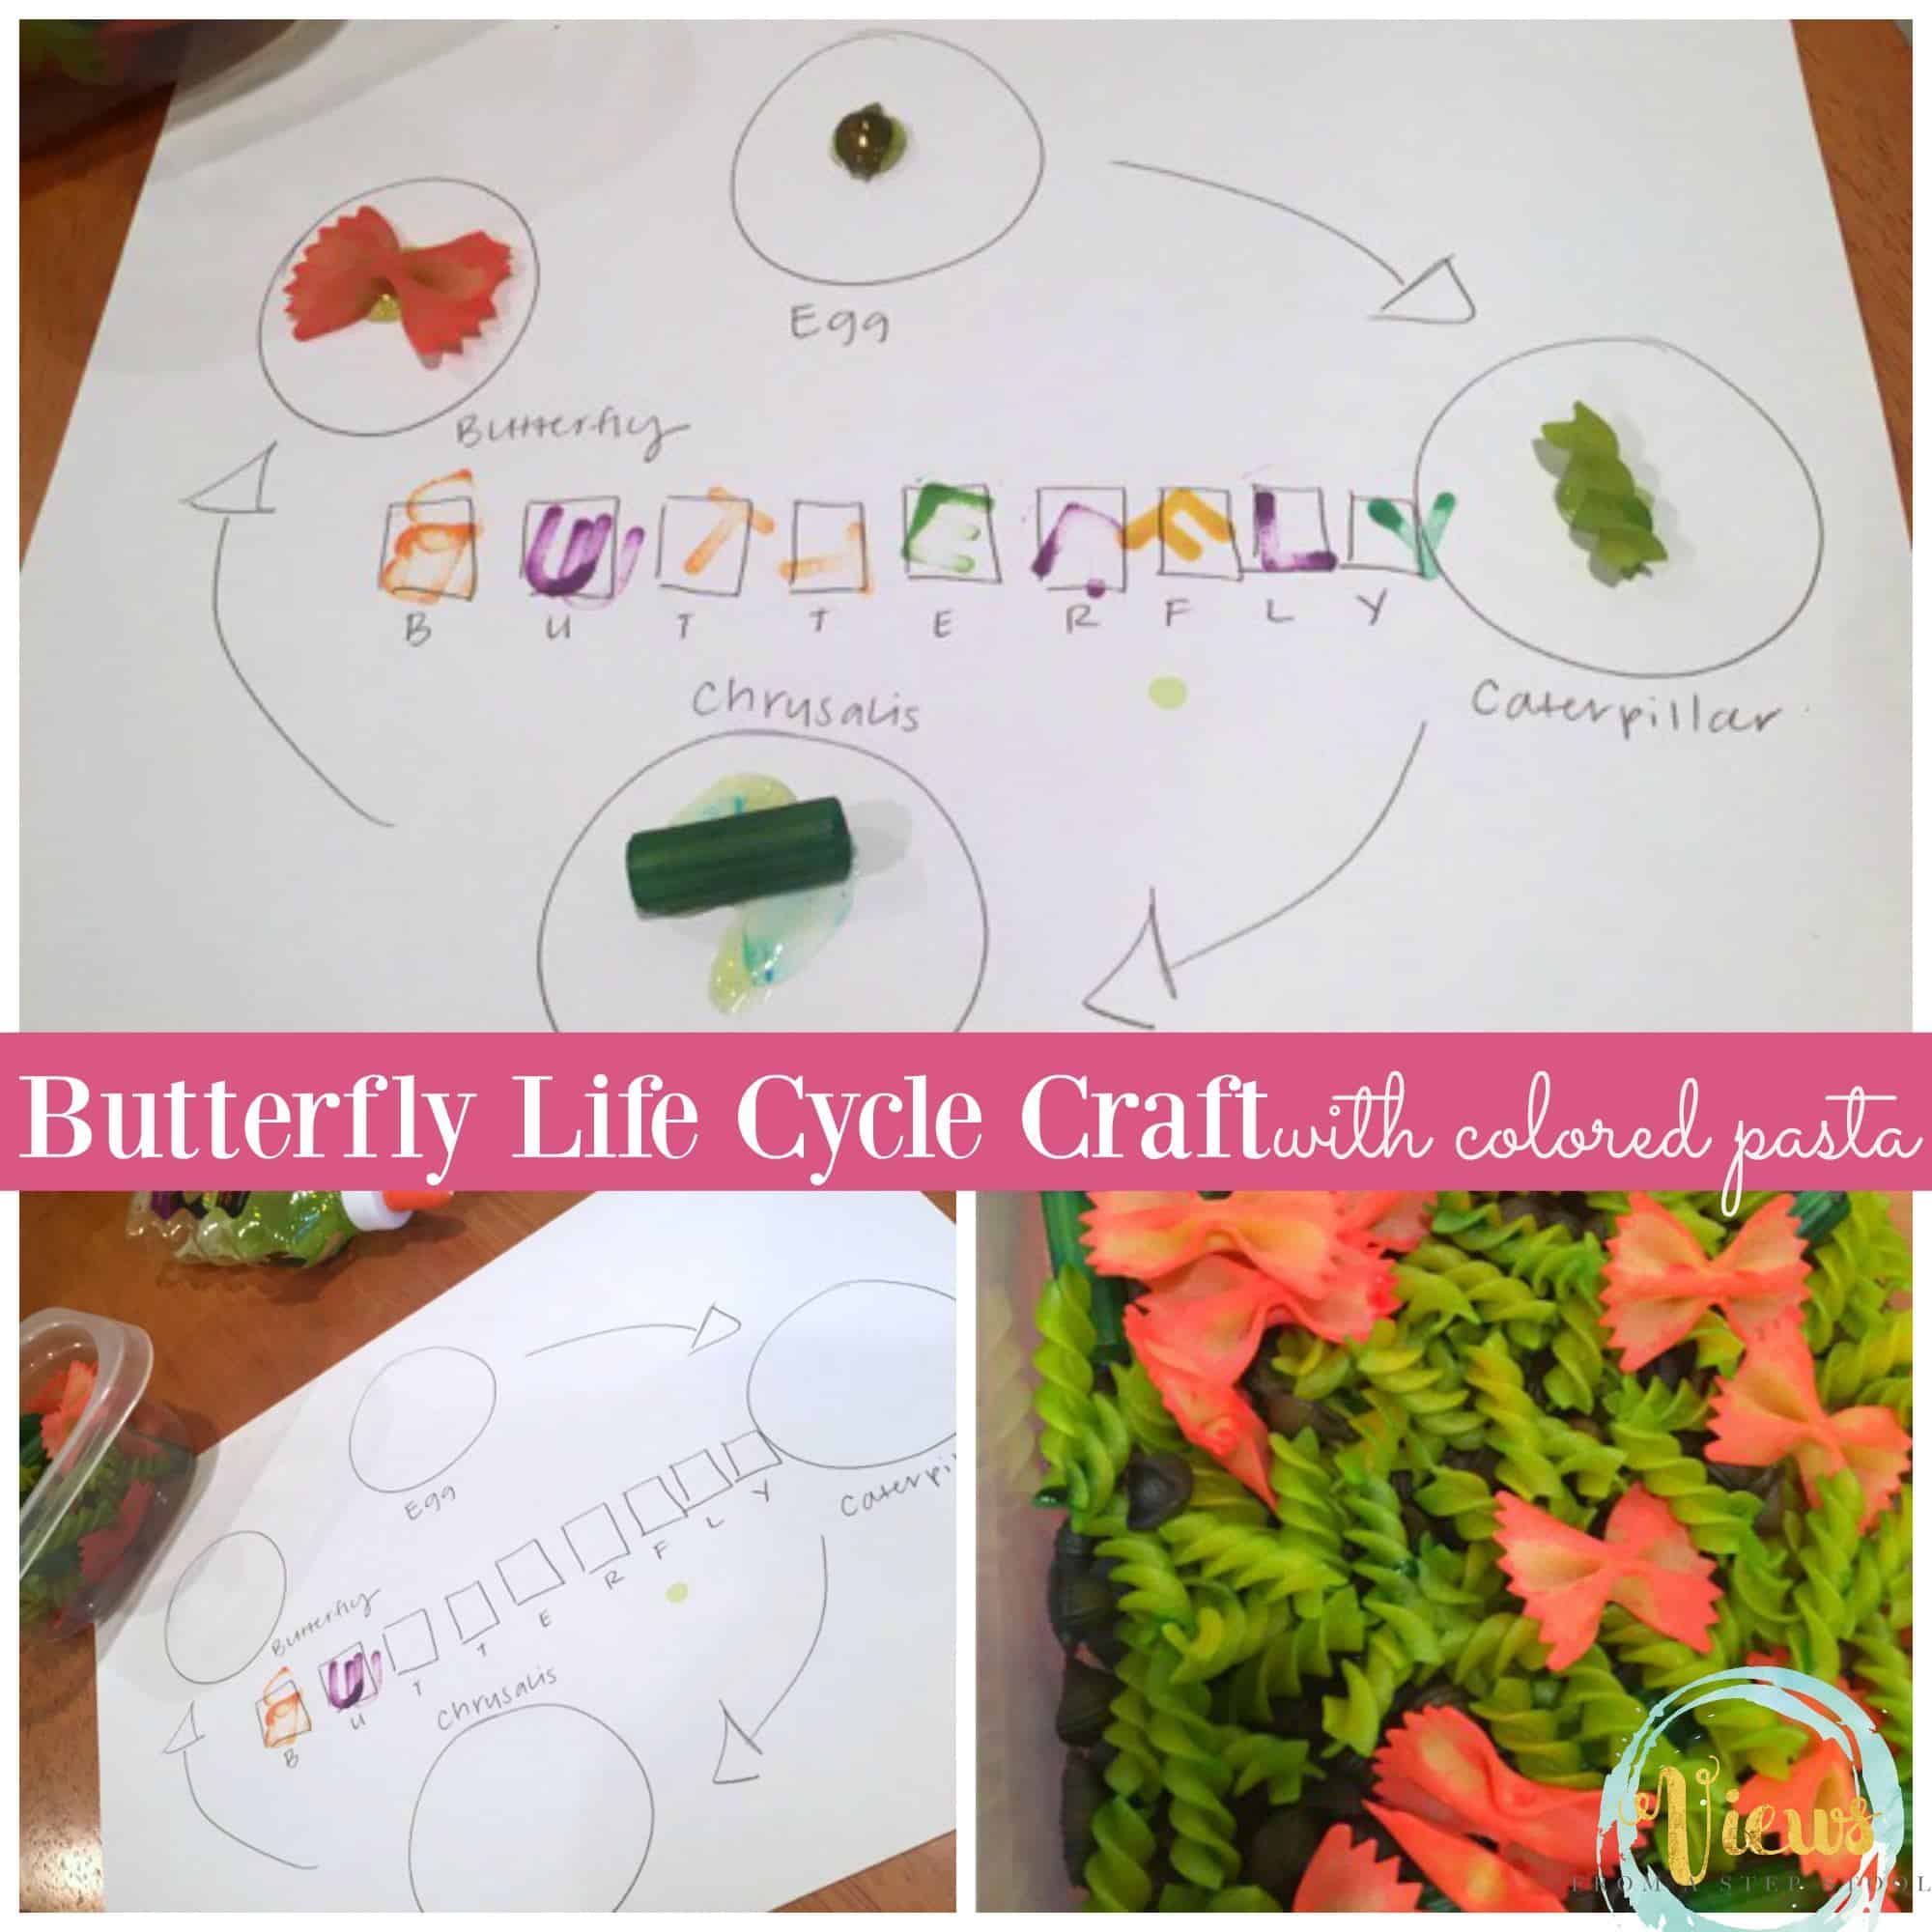 This butterfly life cycle craft uses colored pasta to represent the stages of the butterfly life cycle. Making a perfect, hands-on science project for kids! 